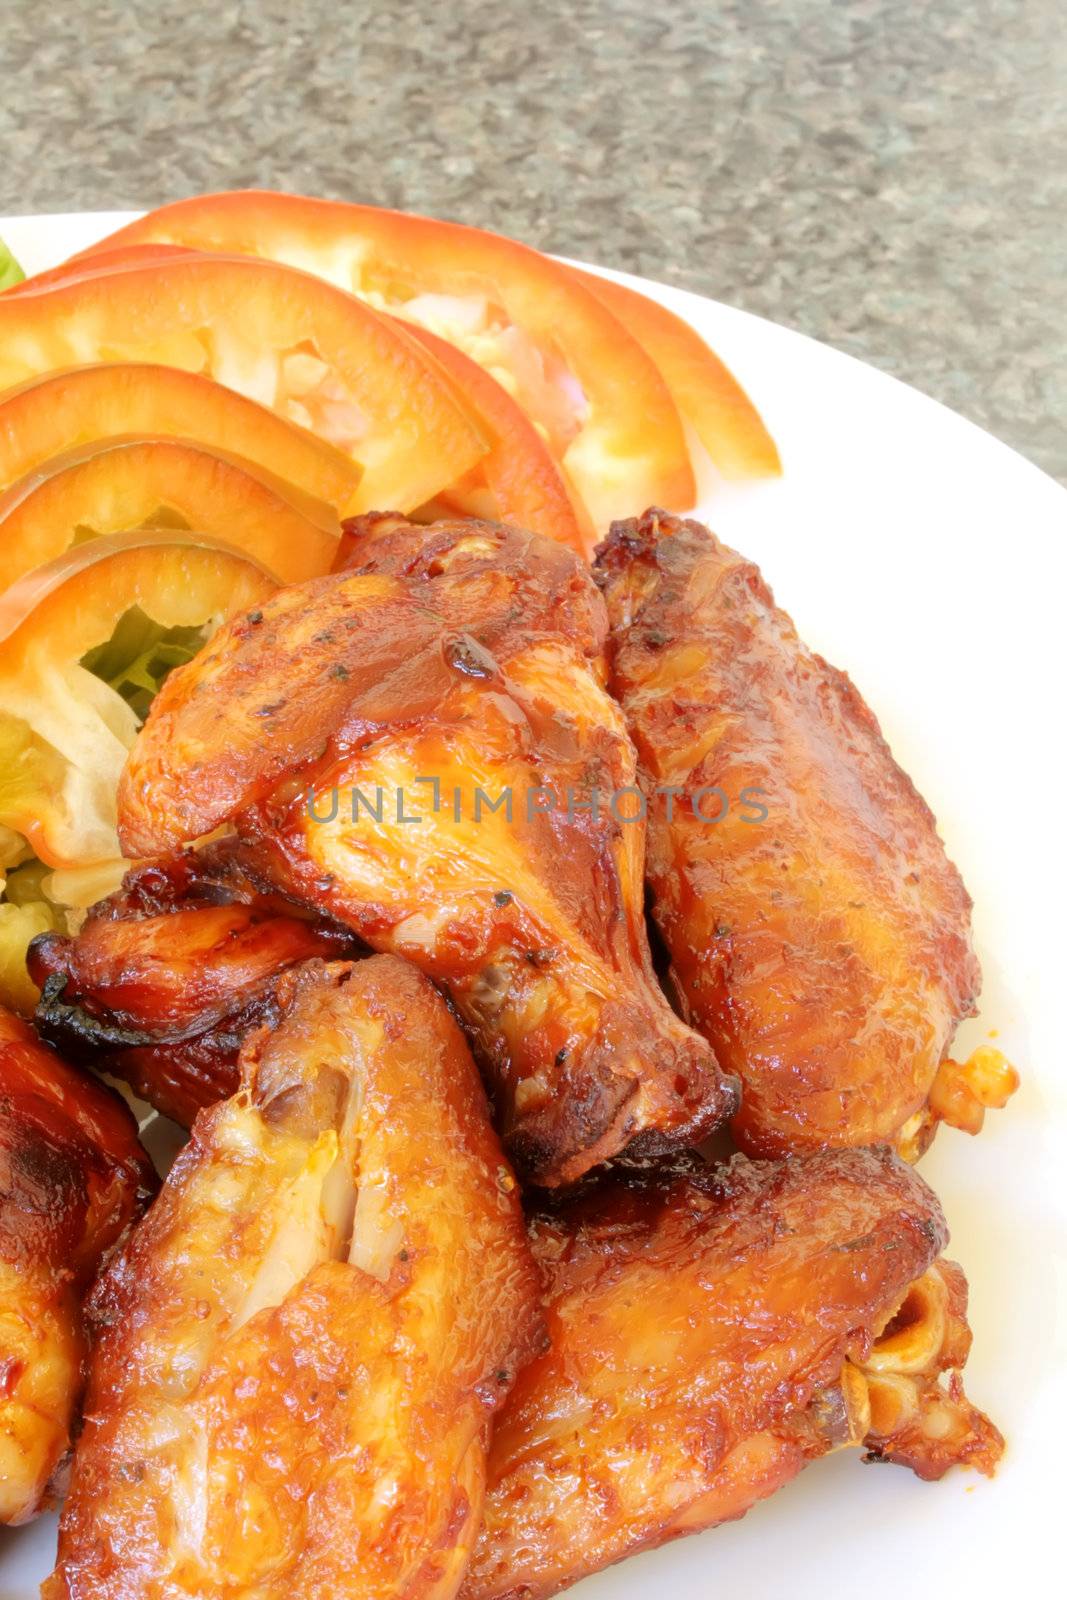 Chicken Wings on a White Plate with Vegetables